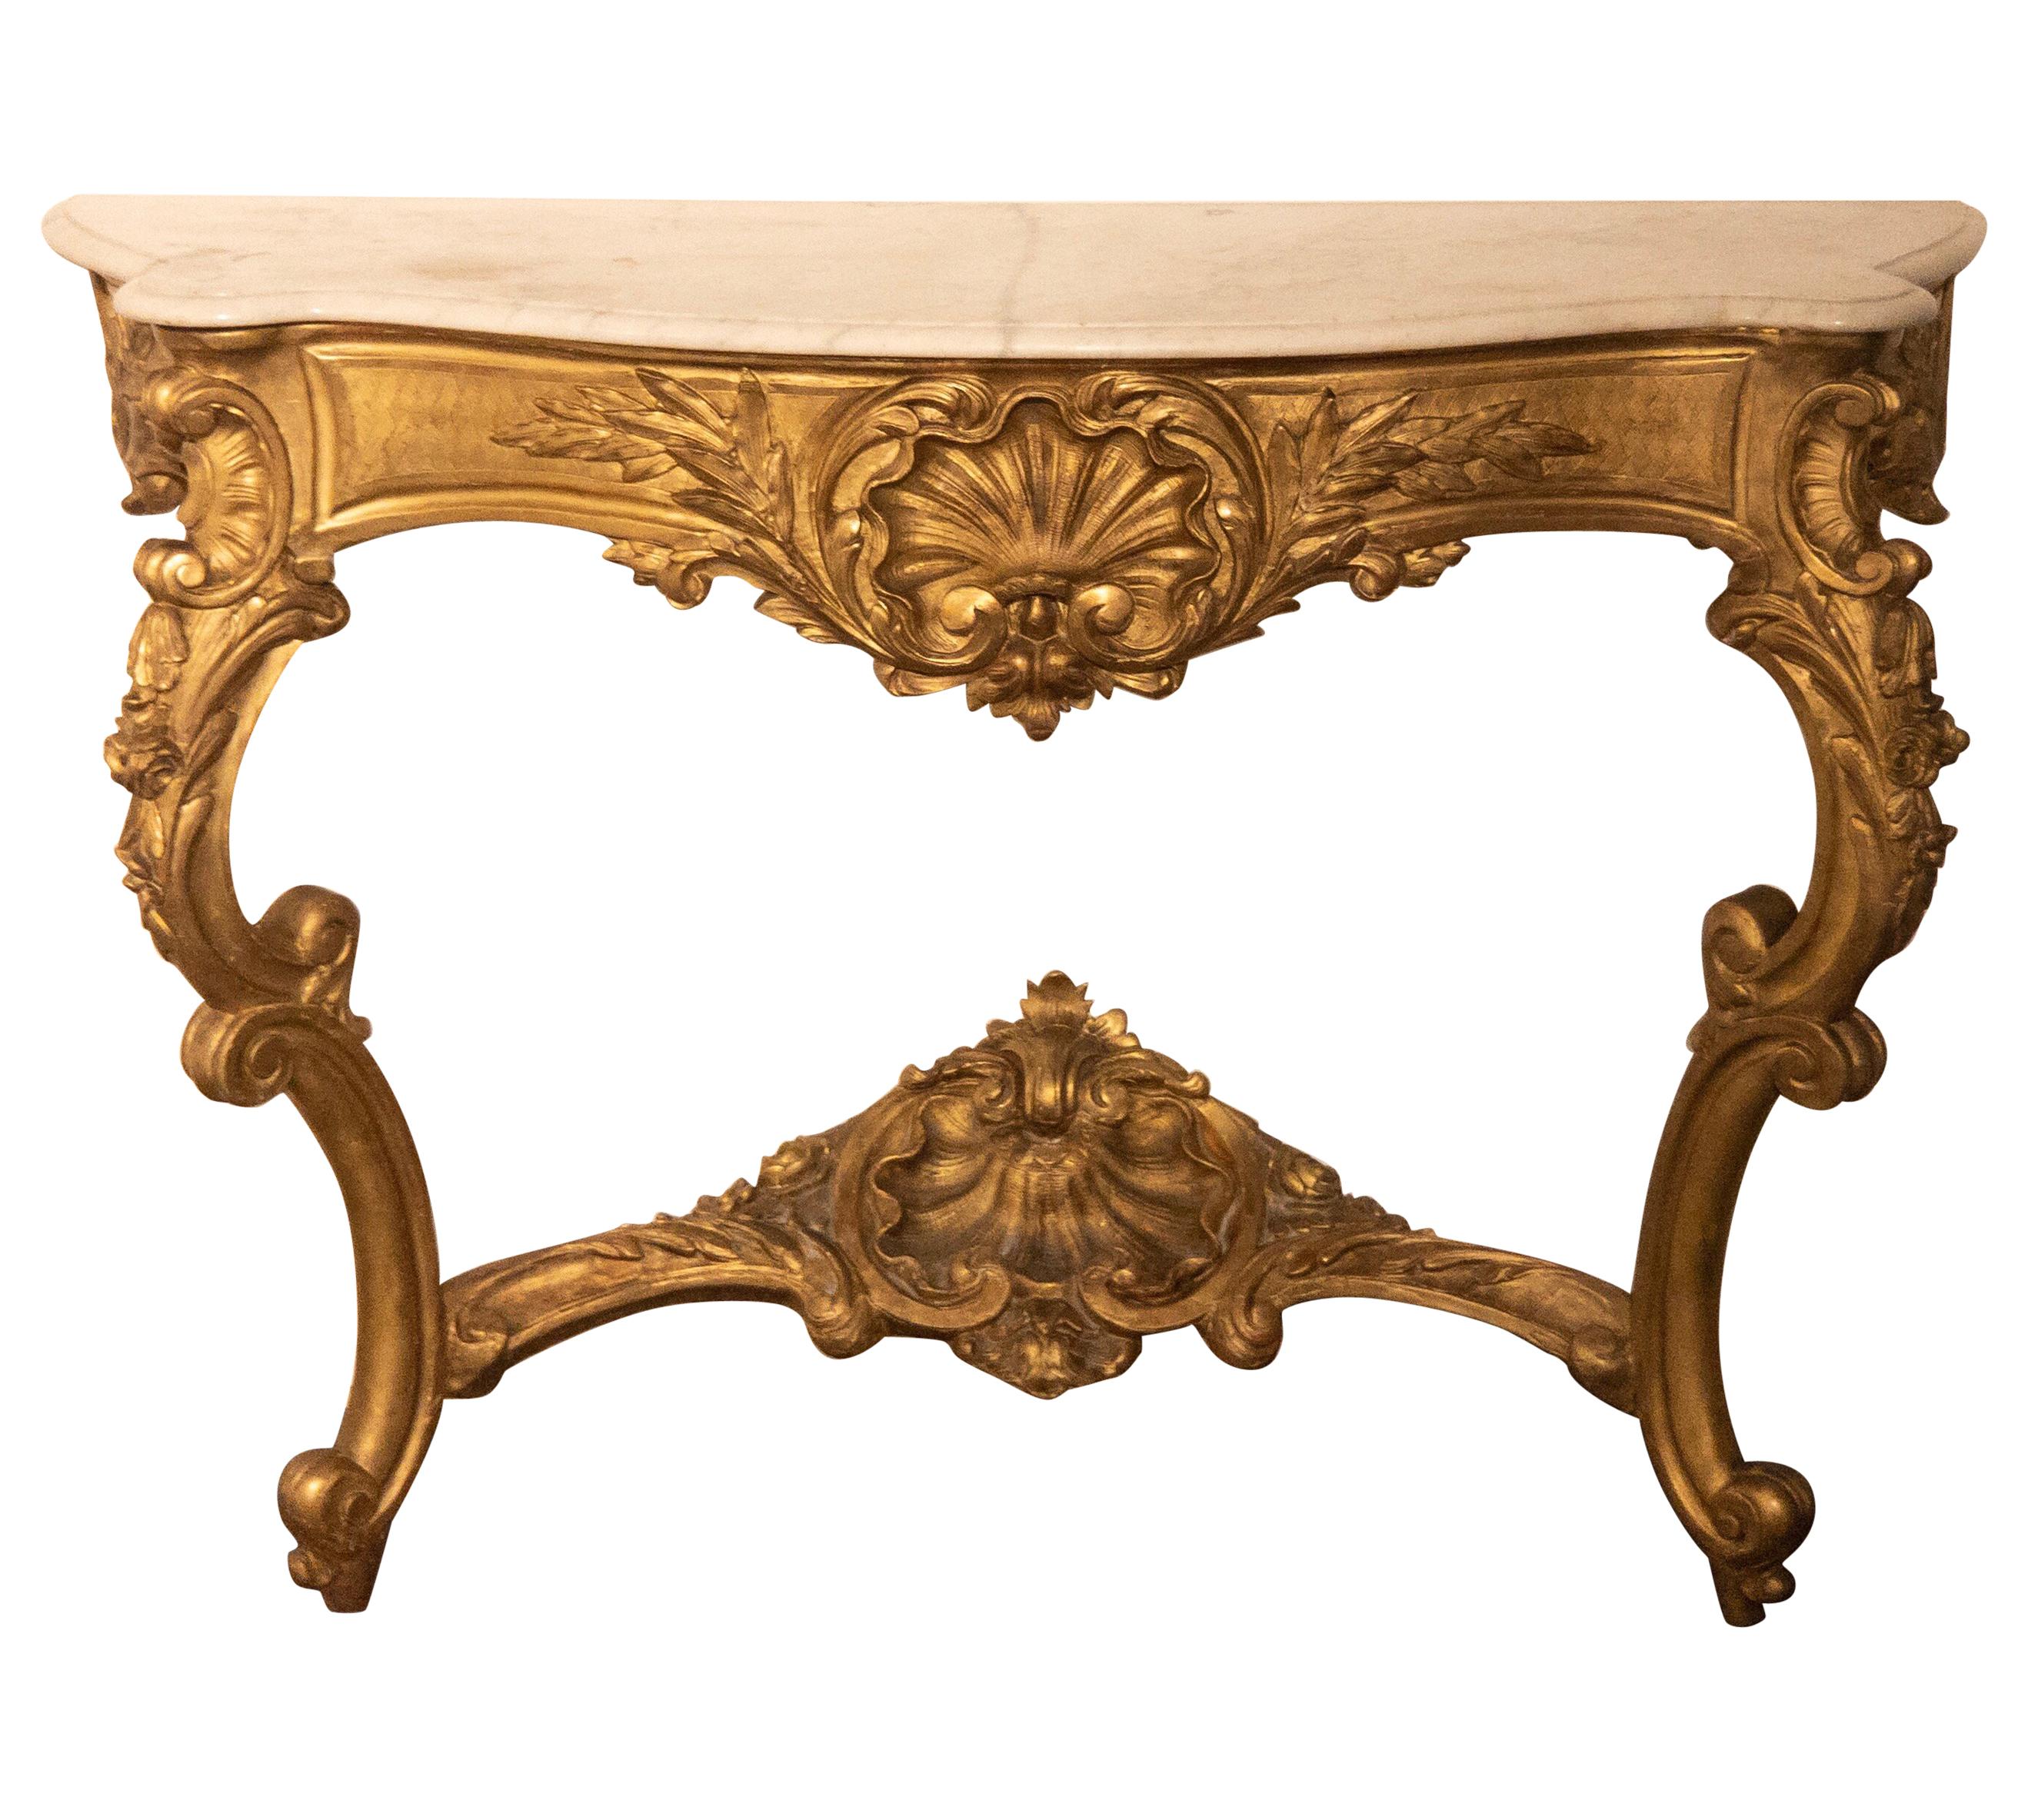 Antique Gilded Baroque Console Table with Carrara Marble-Top from France For Sale